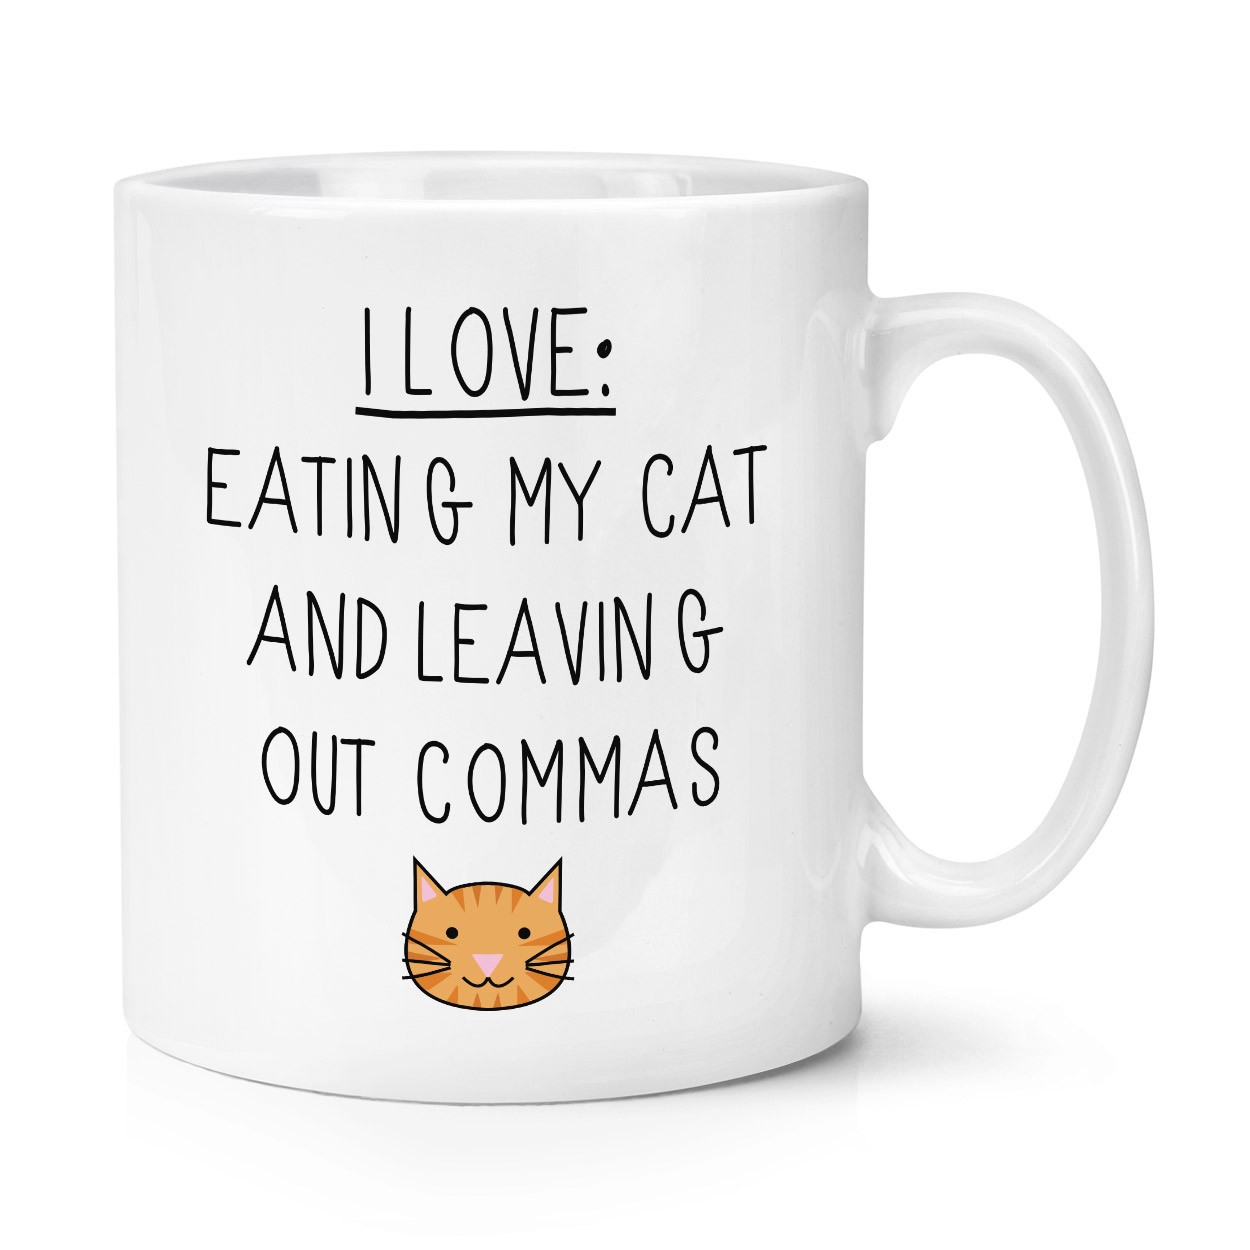 I Love Eating My Cat and Leaving Out Commas 10oz Mug Cup